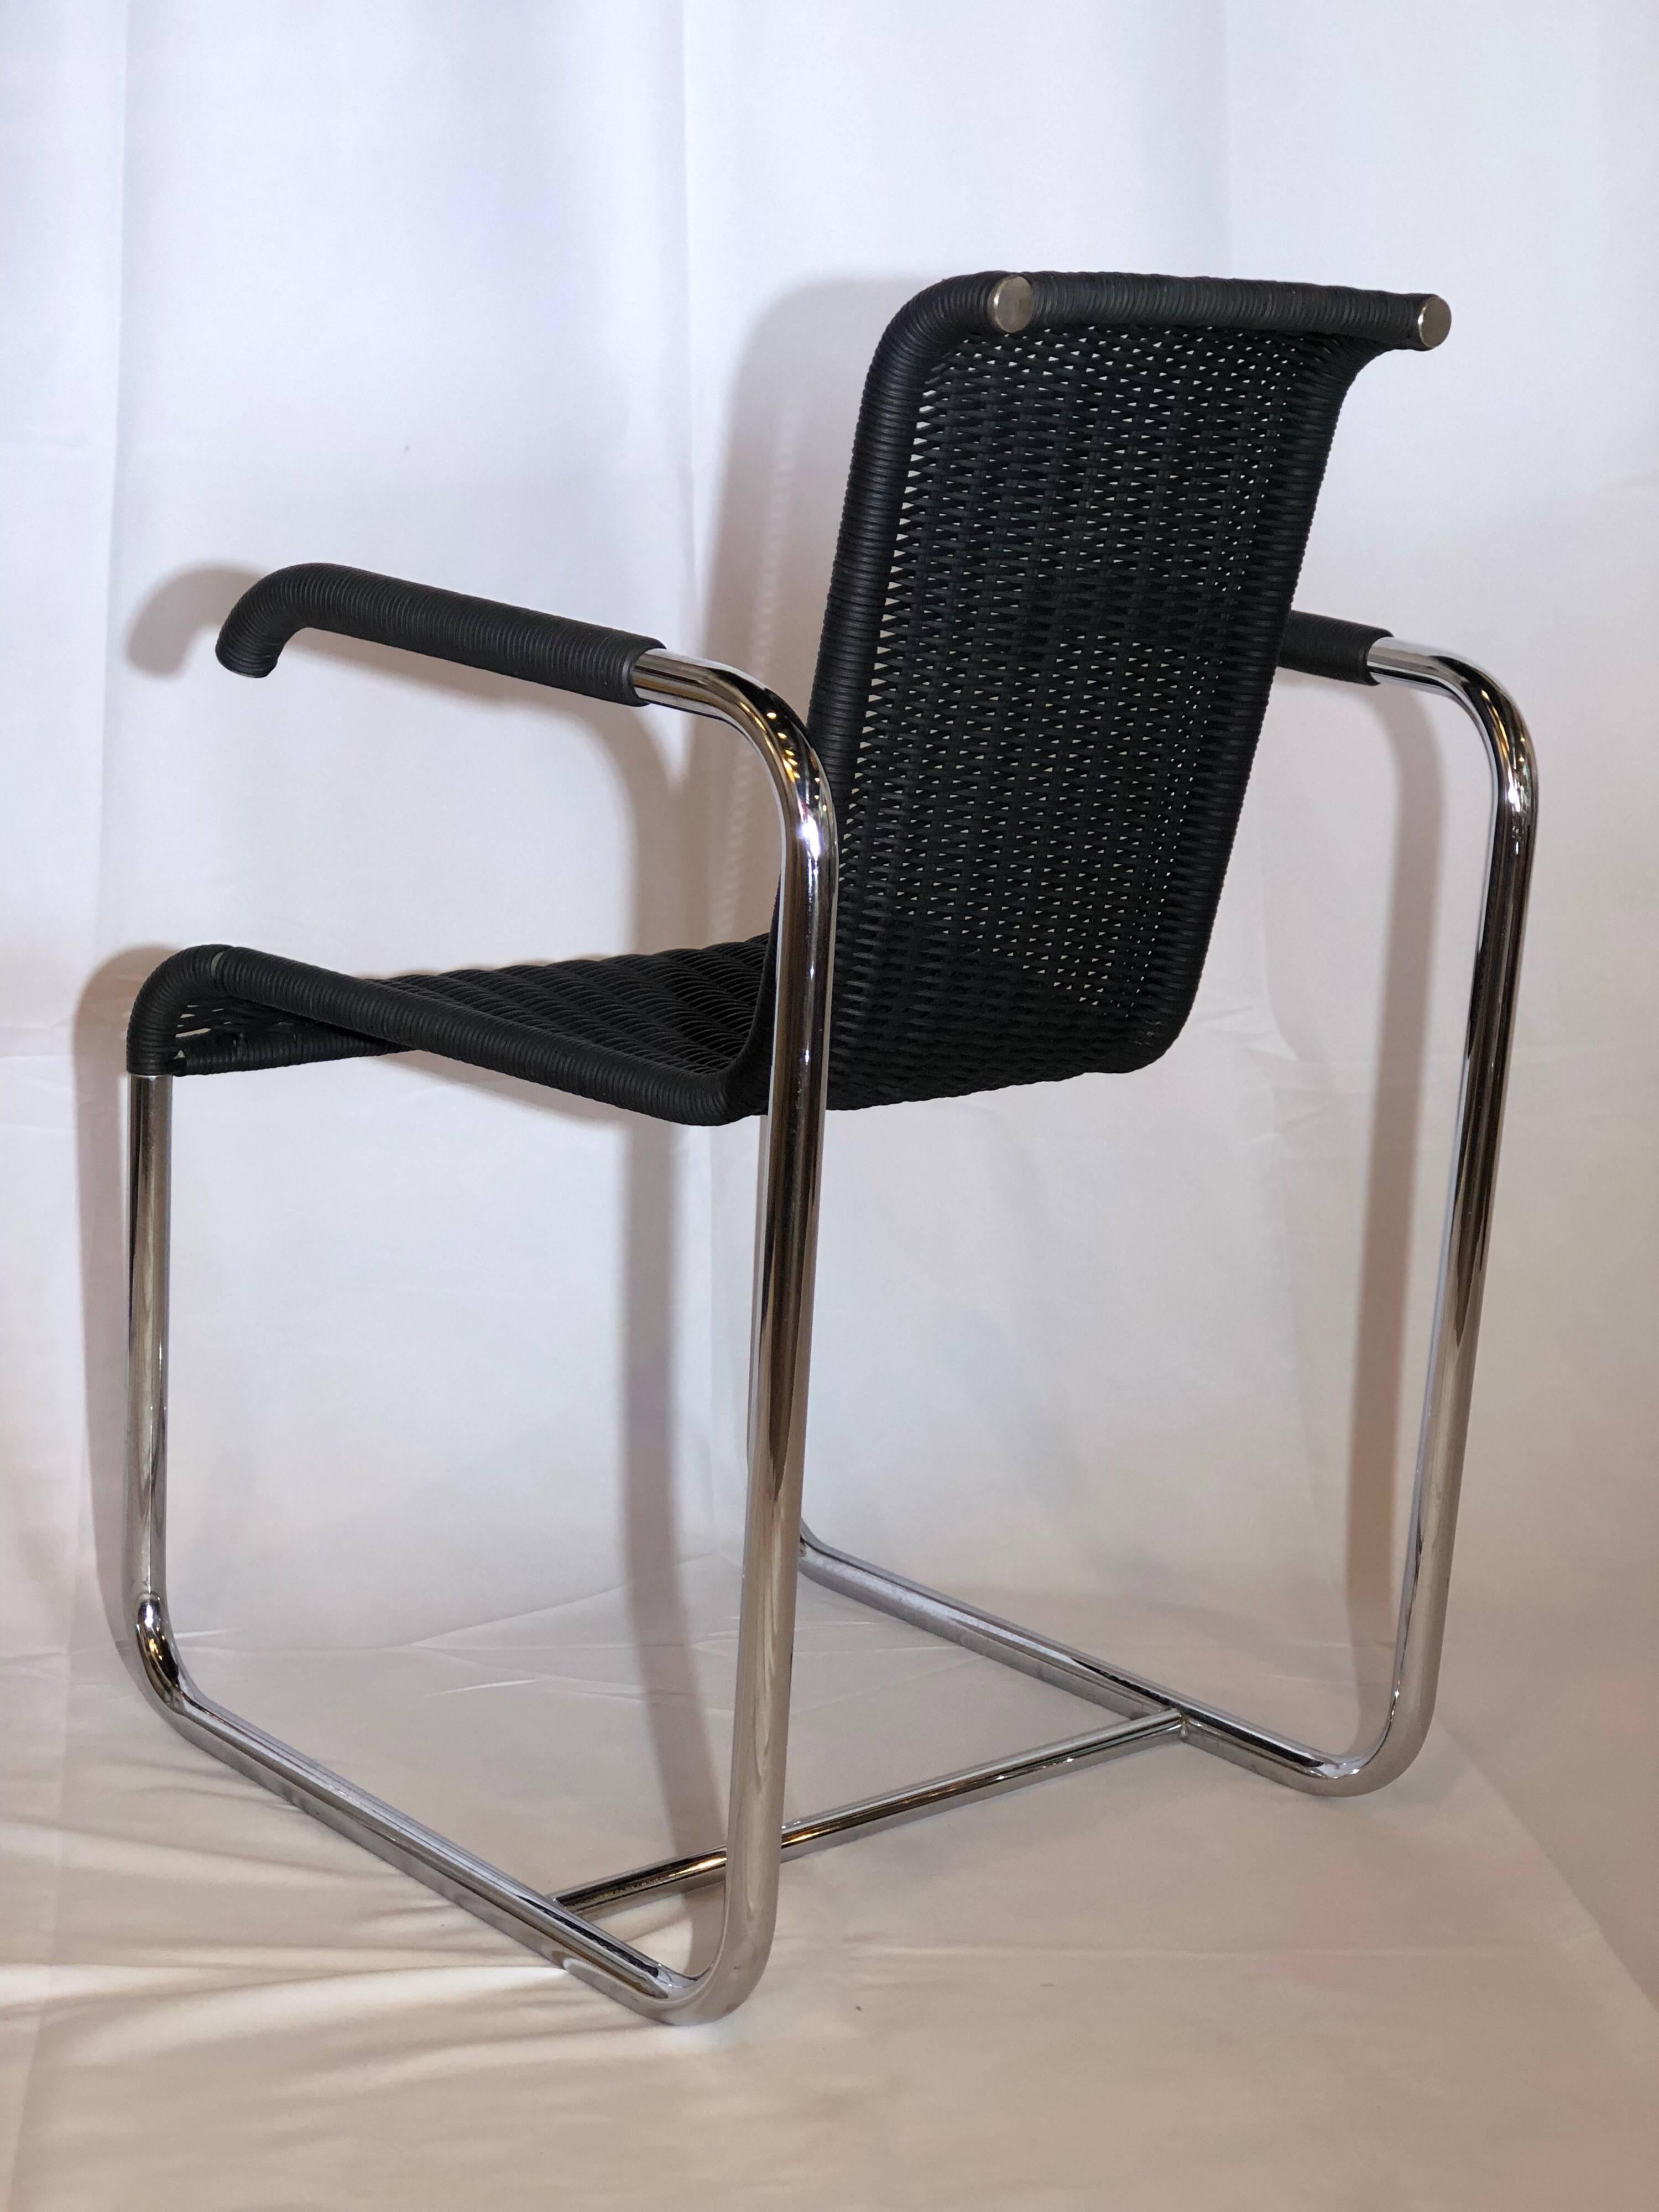 Mid-Century Modern Jean Prouvé D20 Stainless Steel Leather Wicker Chairs for Tecta, Germany, 1980s For Sale